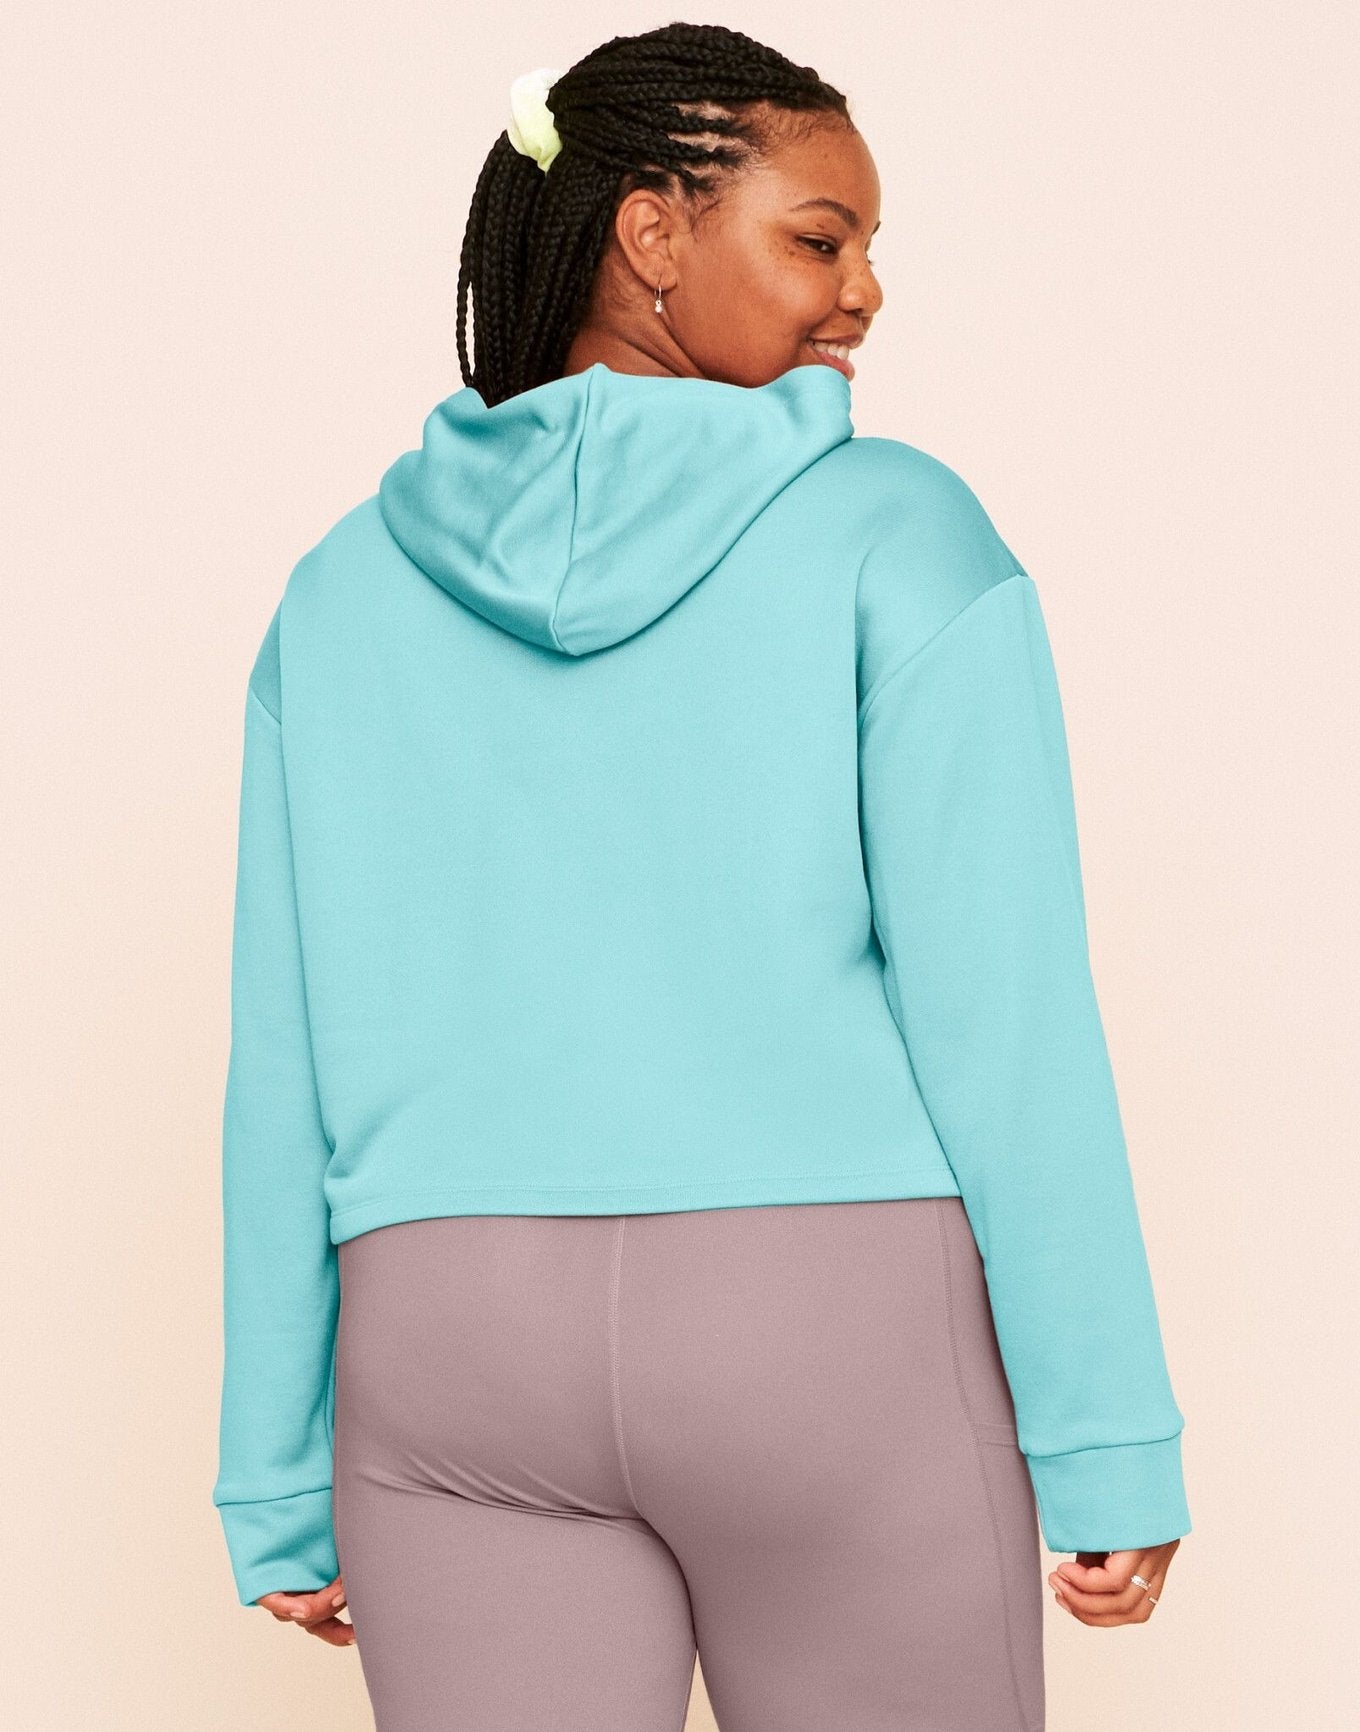 Earth Republic Myah Escape Luxe Hoodie Cropped Hoodie in color Island Paradise and shape hoodie